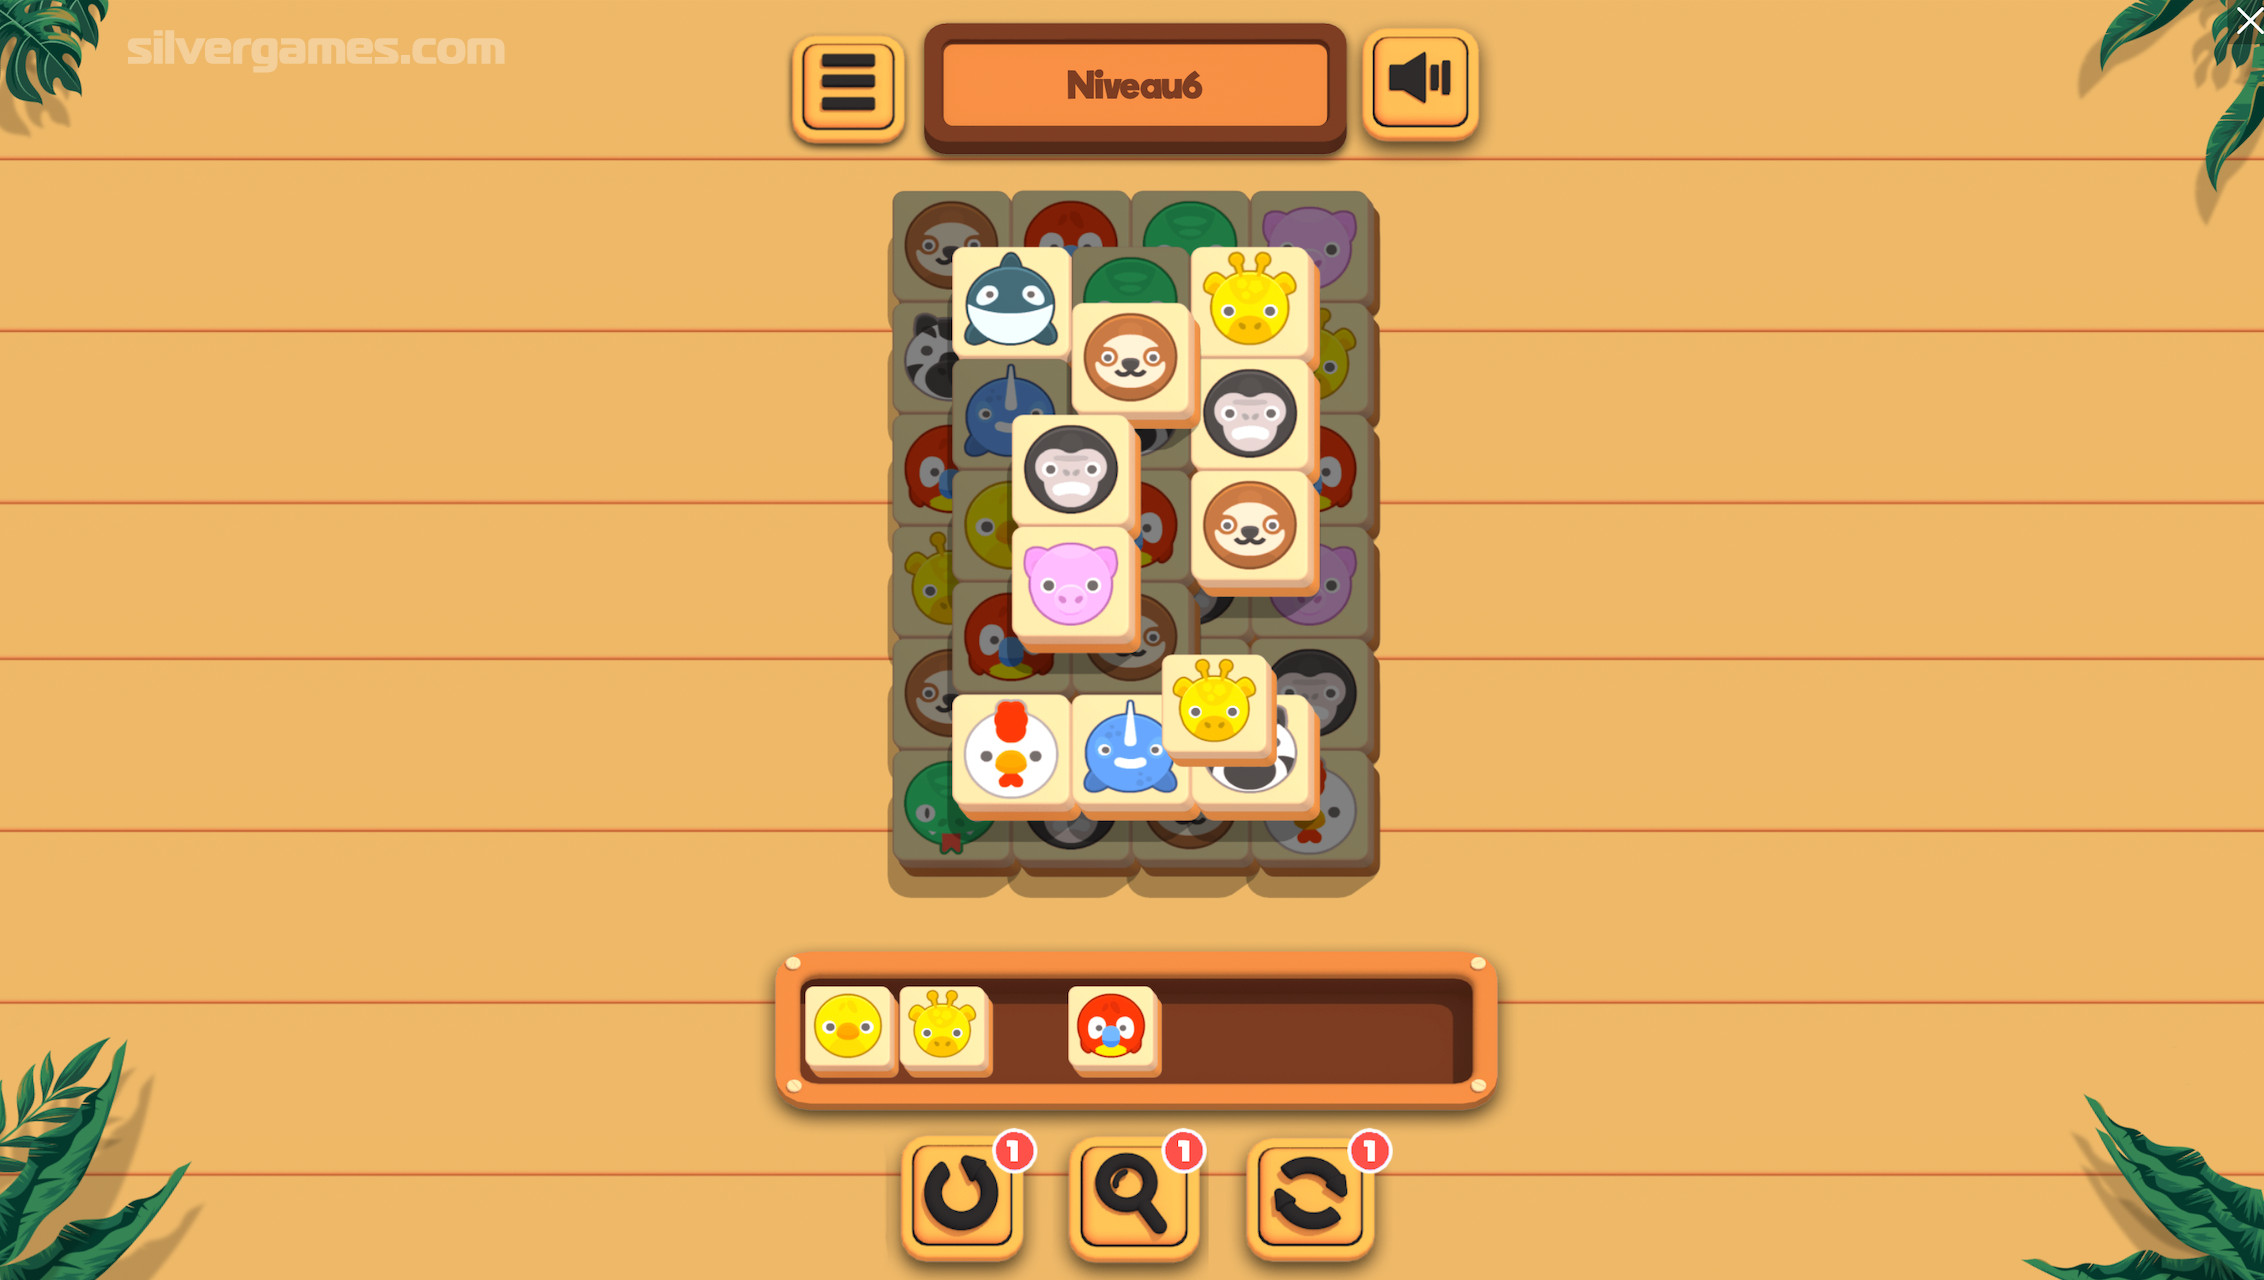 Mahjong Solitaire Animal - Play Mahjong Solitaire Animal Online on  SilverGames